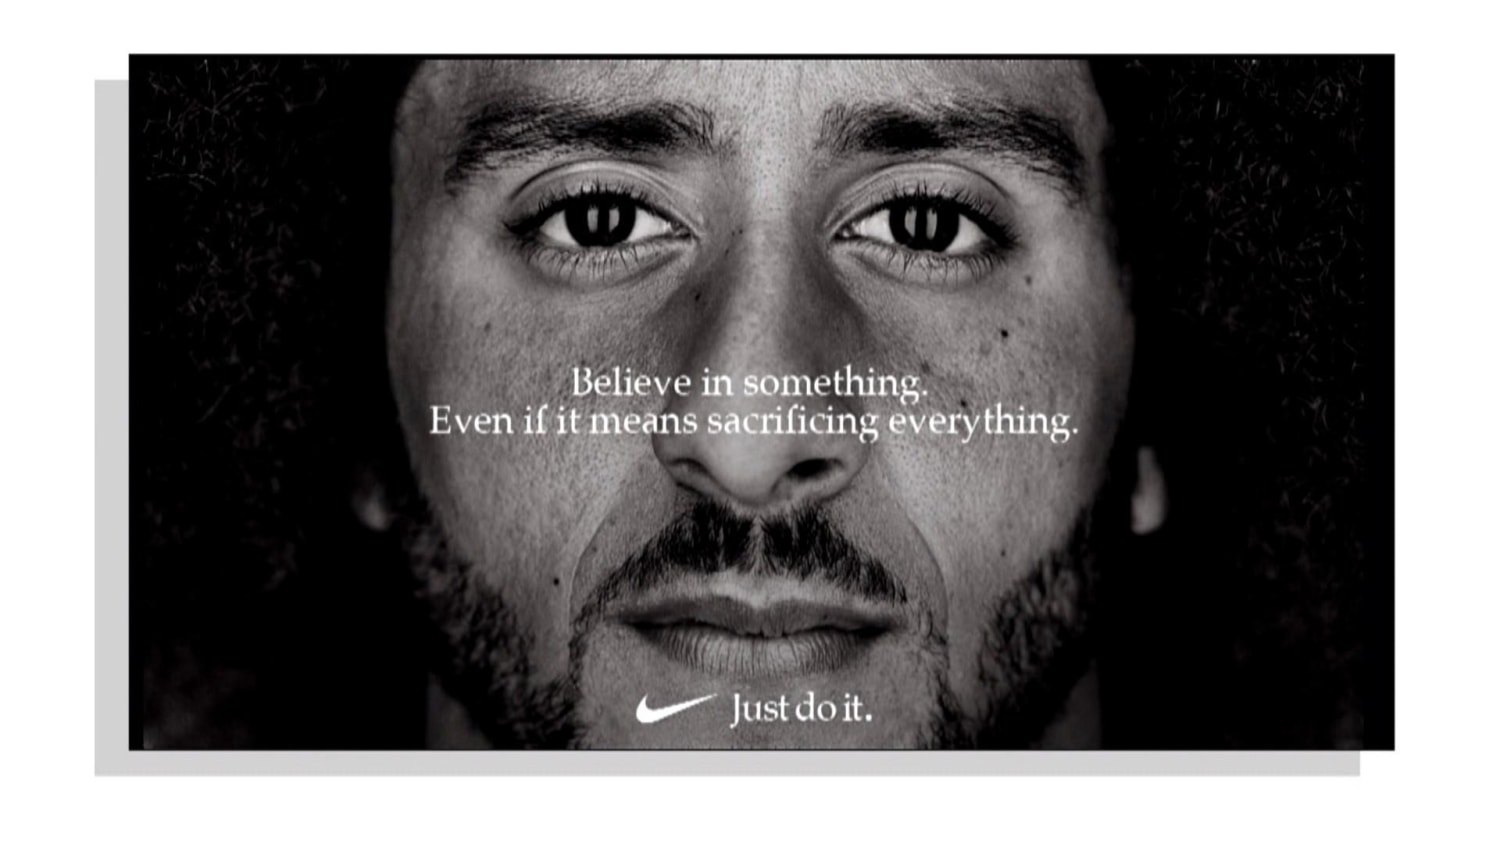 down on defiance of Kaepernick criticism, releases full-length ad